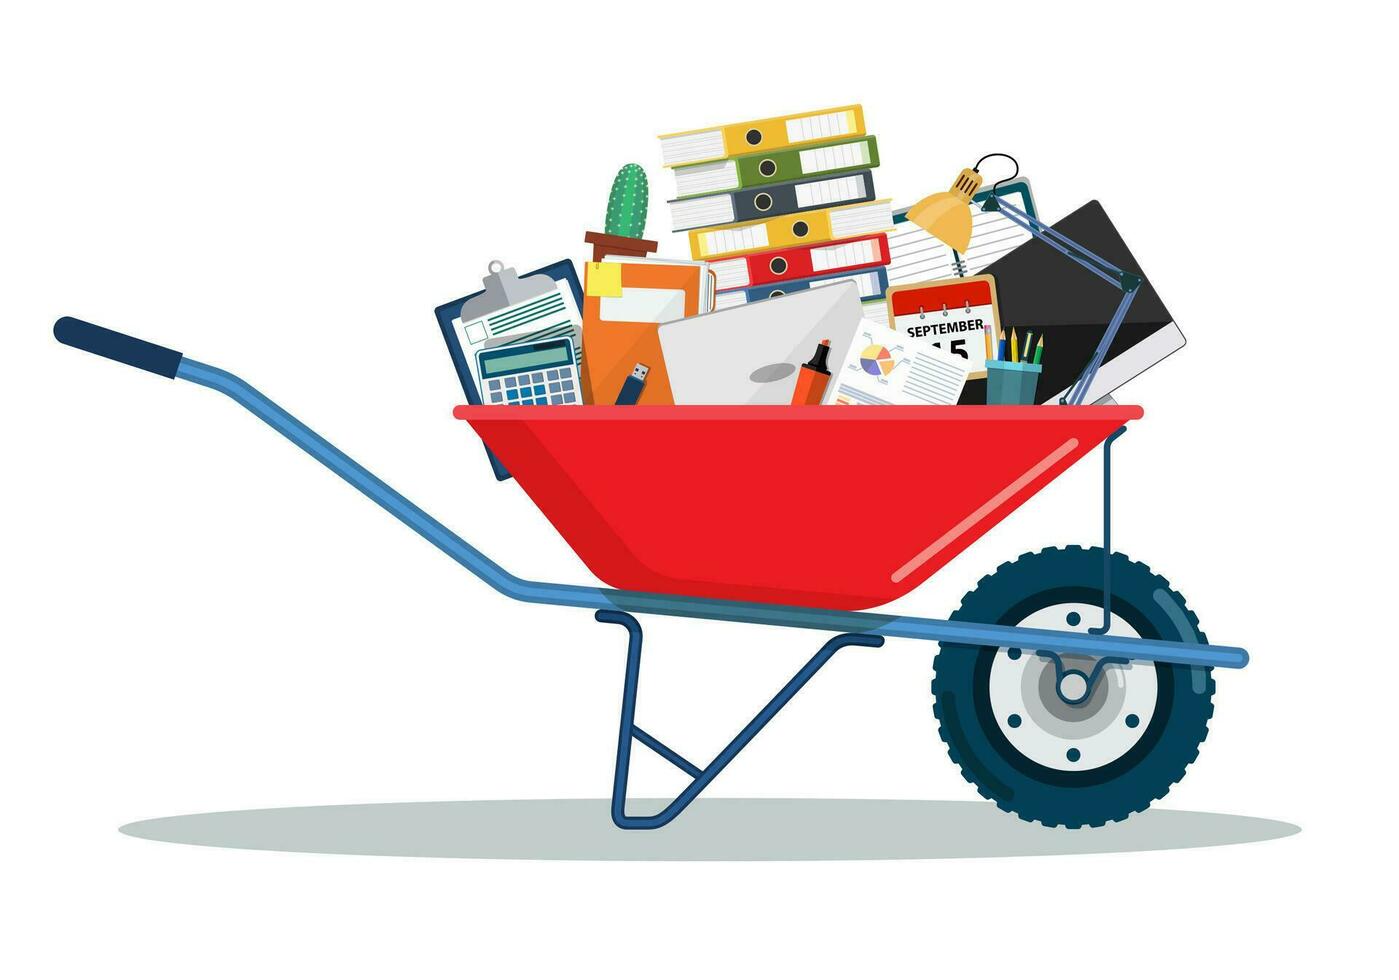 Moving to new office. Wheelbarrow with folder, document paper, contract, calculator, cactus. Vector illustration in flat style